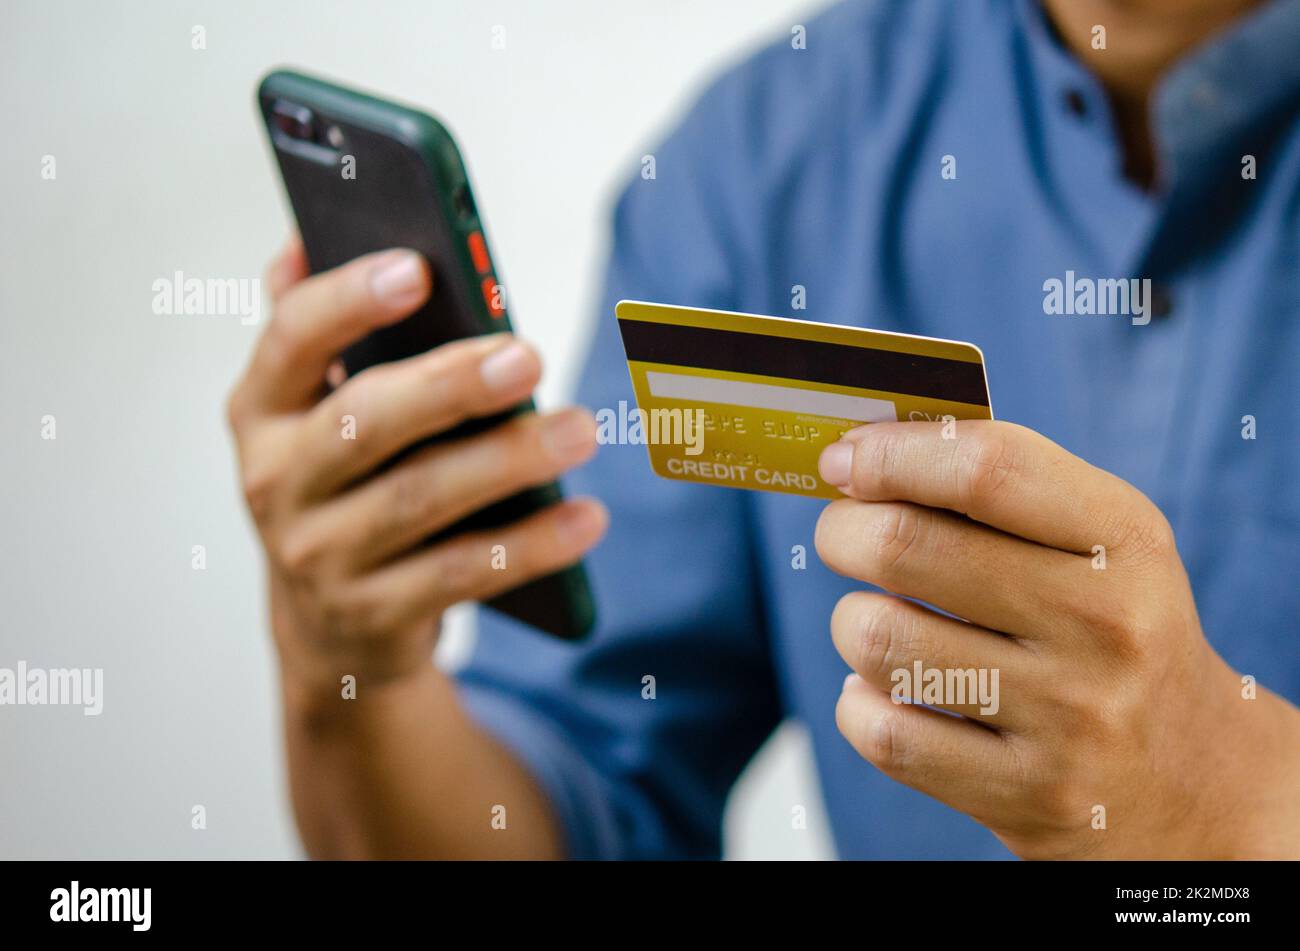 man hand holding credit card and mobile phone online shopping e-commerce and internet banking. Stock Photo